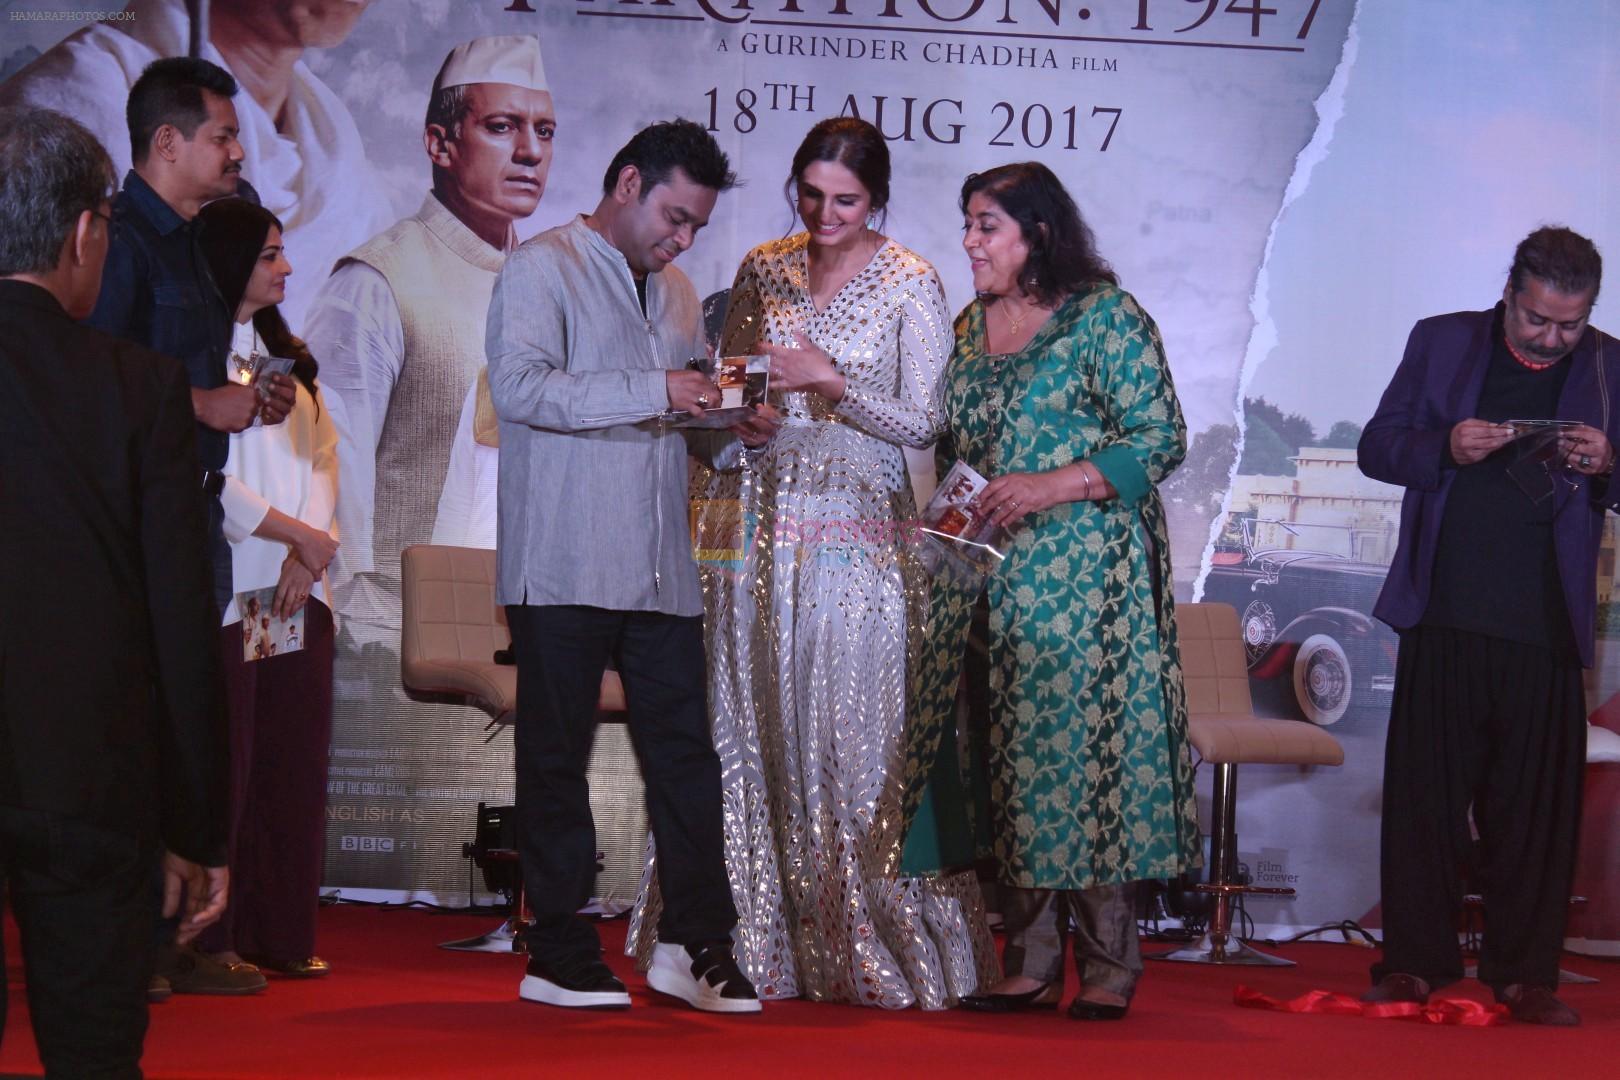 A. R. Rahman, Huma Qureshi, Gurinder Chadha At Music Launch Of Film Partition 1947 on 4th July 2017